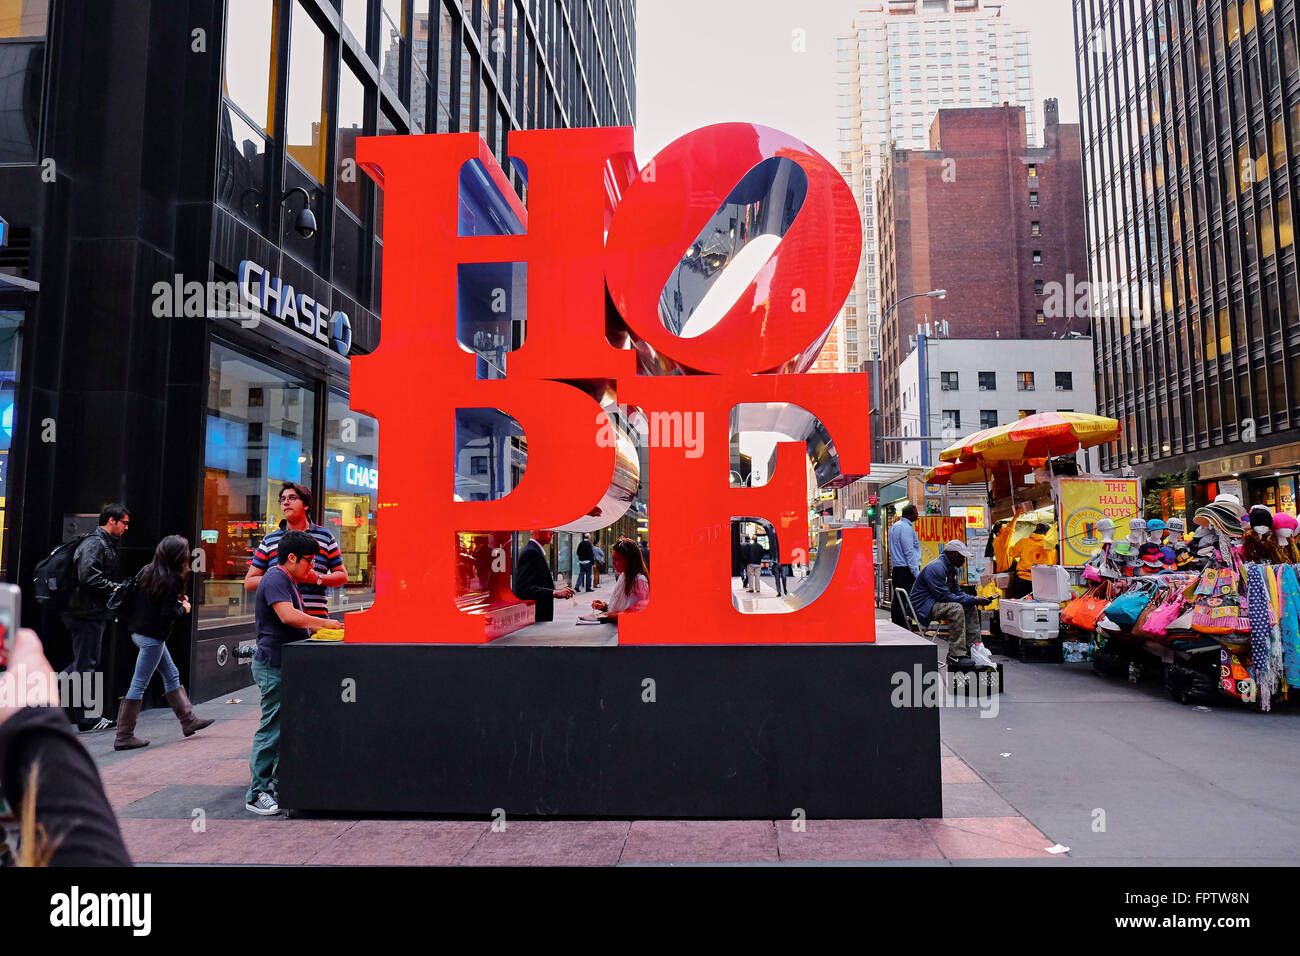 NEW YORK CITY - OCTOBER 9, 2014: The Hope sculpture of Robert Indiana standing on the corner of 7th and 53rd in New York City Stock Photo